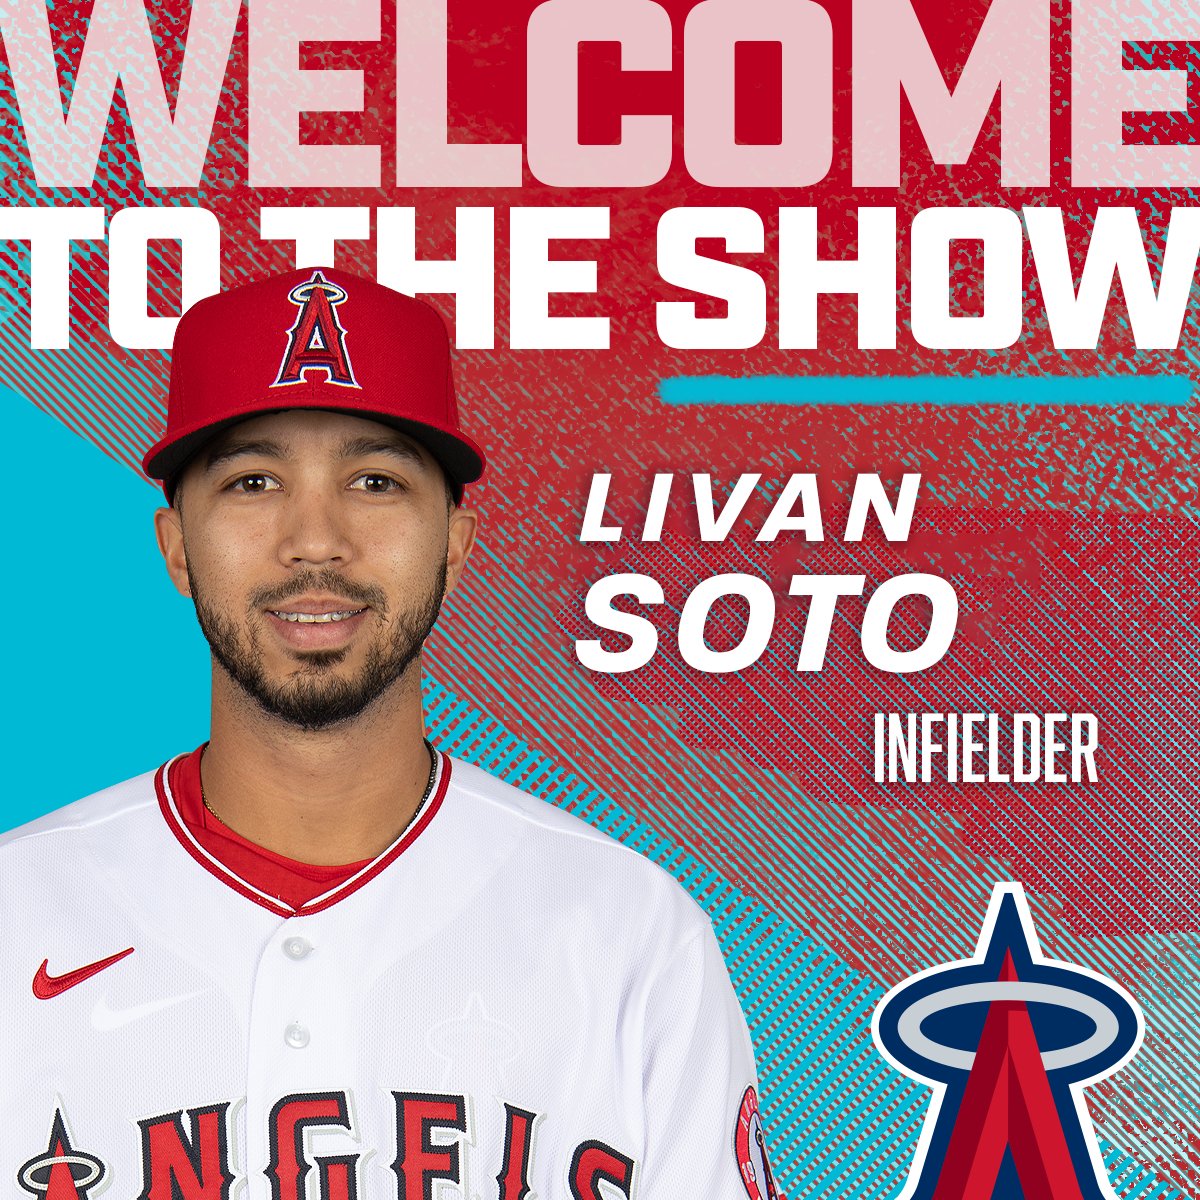 Welcome to the Show, Livan!